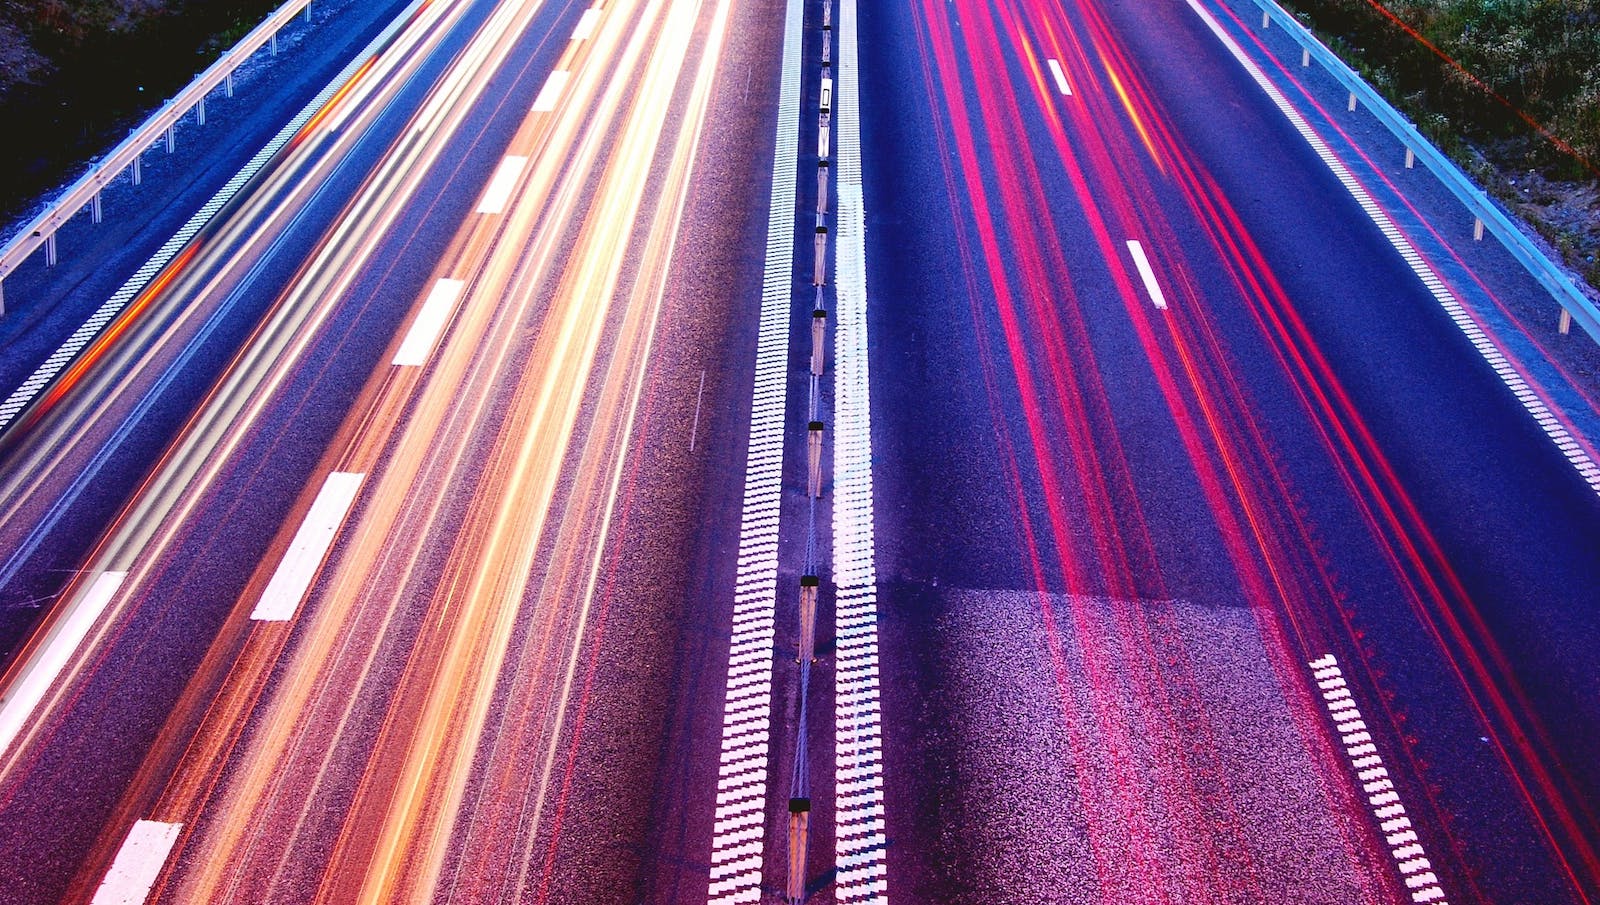 Long exposure of car lights on a road